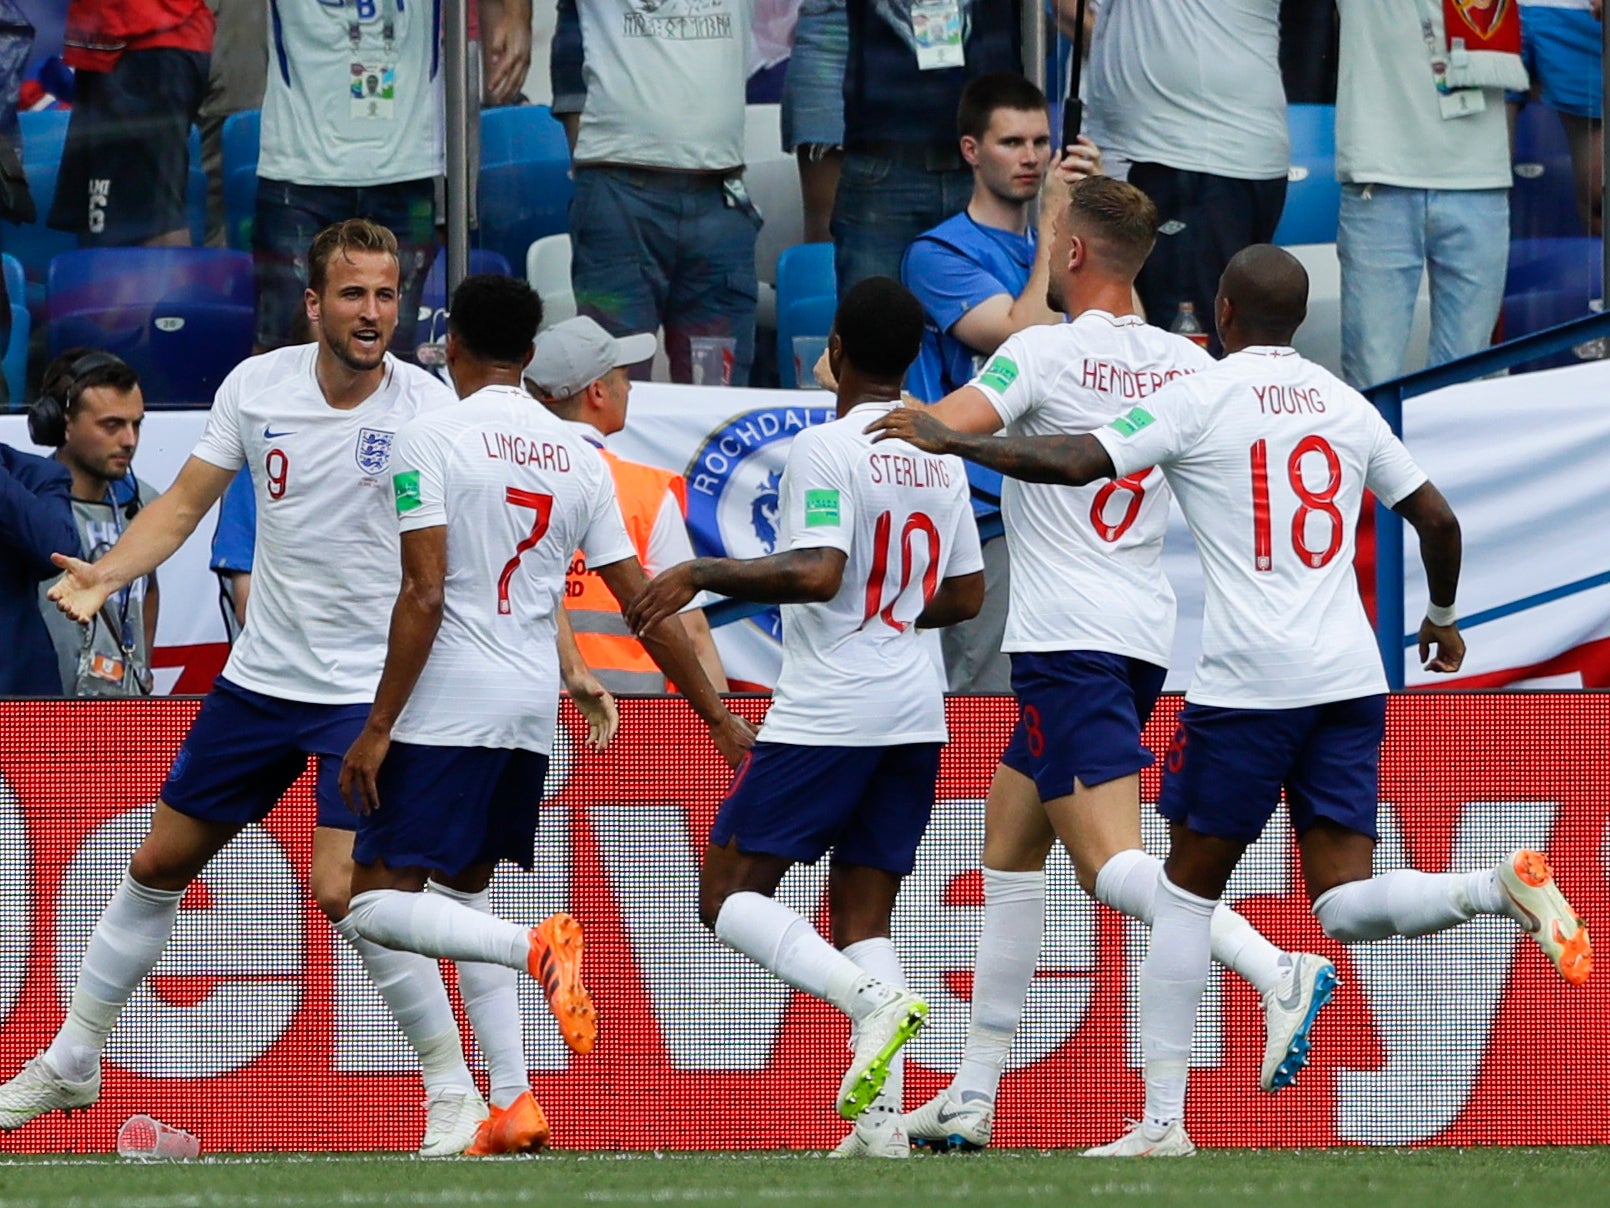 England are embarking on yet another World Cup campaign